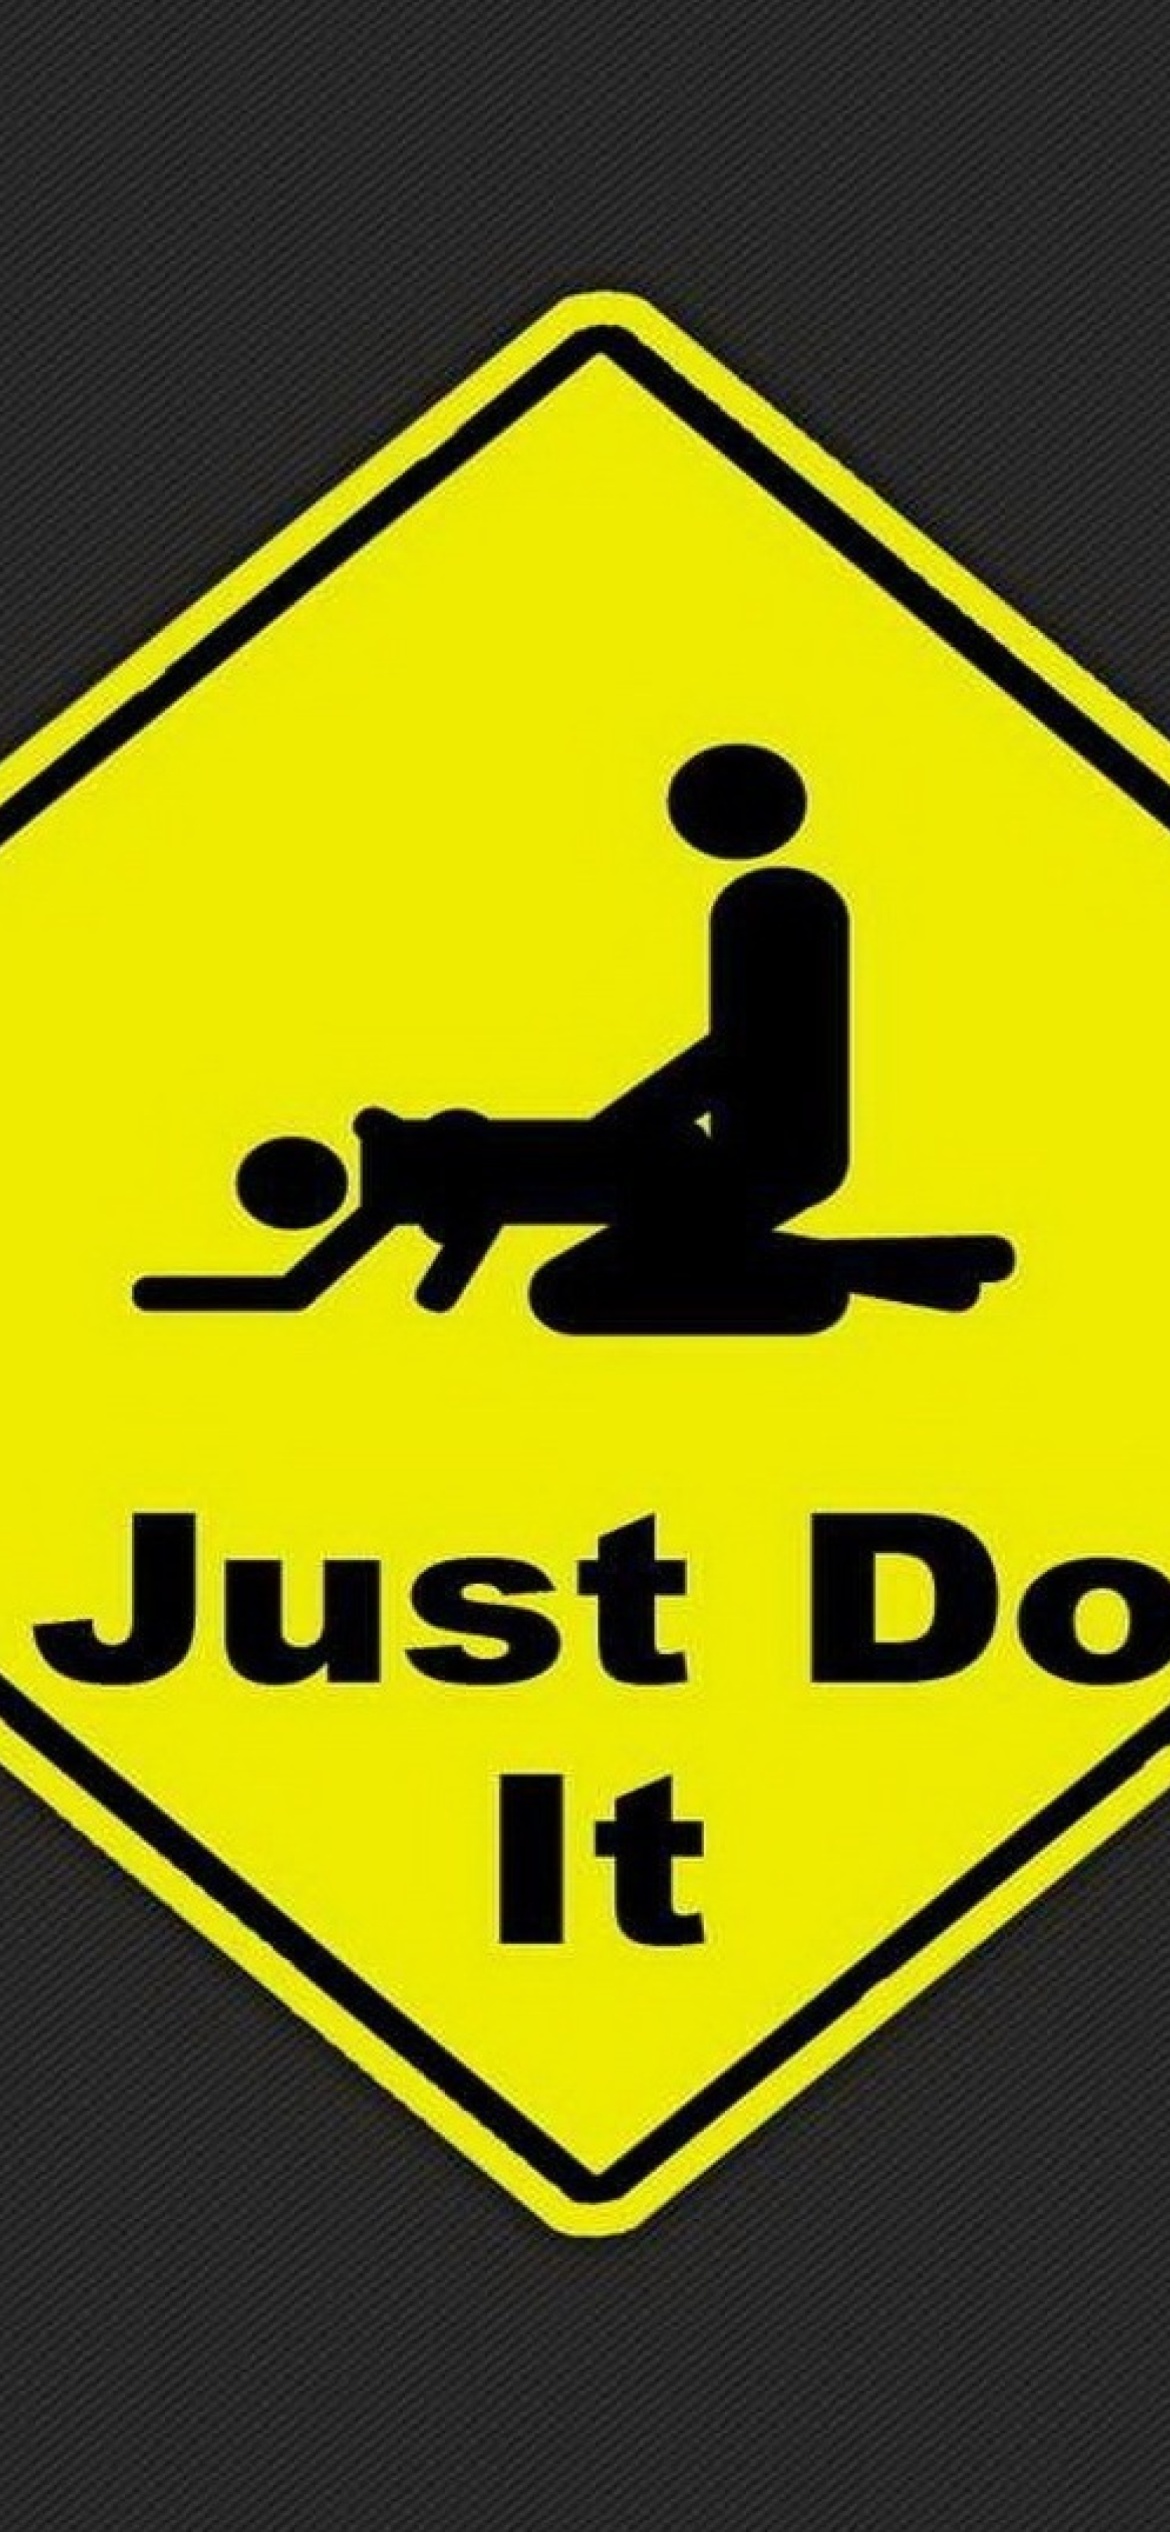 Just Do It Funny Sign wallpaper 1170x2532